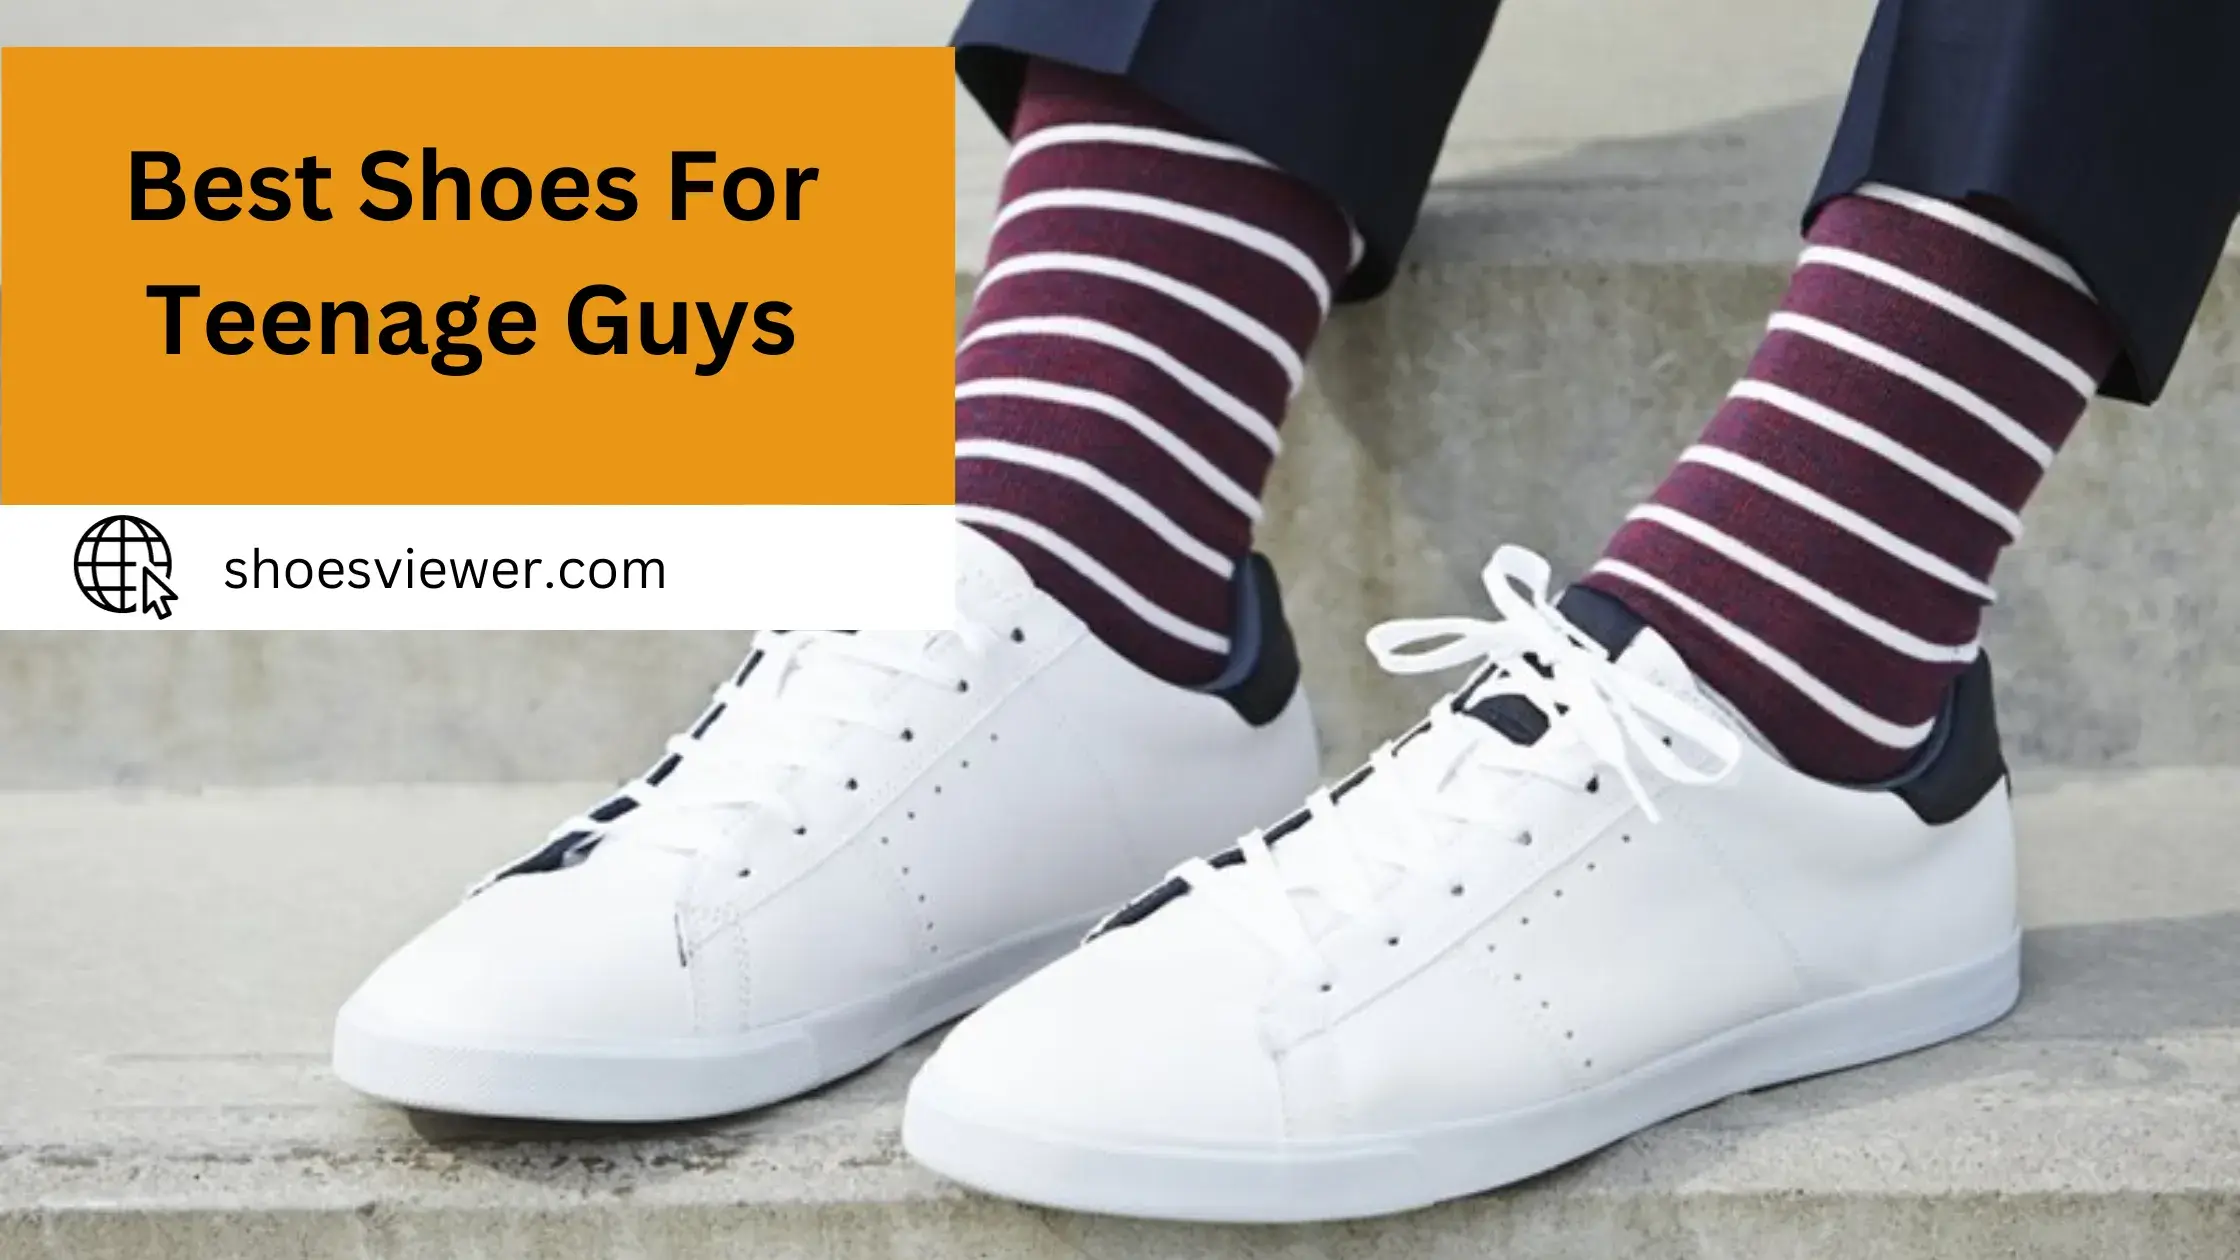 Best Shoes For Teenage Guys - (An In-Depth Guide)